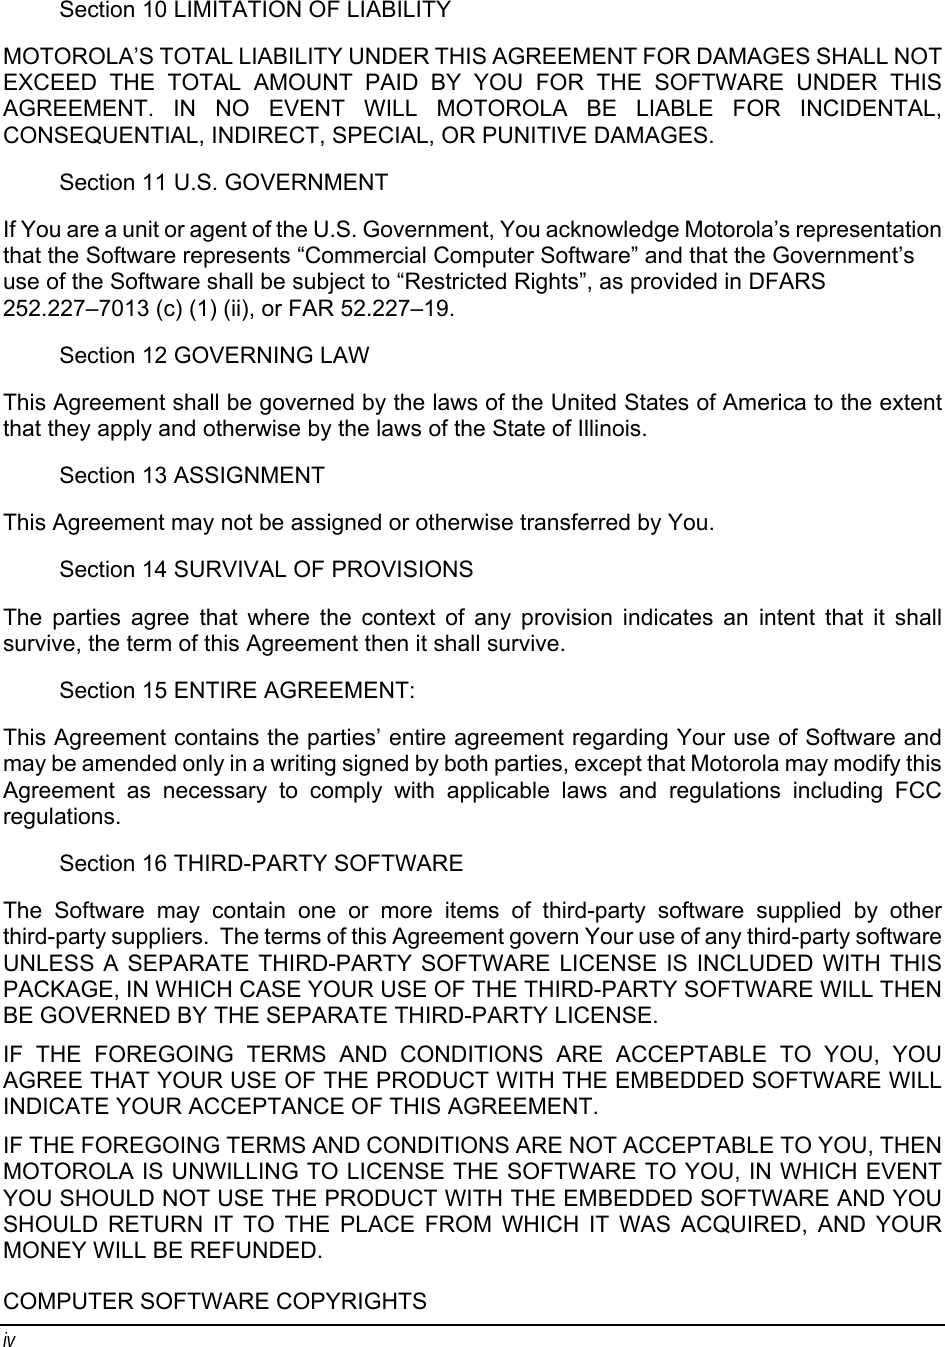 iv Section 10 LIMITATION OF LIABILITY MOTOROLA’S TOTAL LIABILITY UNDER THIS AGREEMENT FOR DAMAGES SHALL NOT EXCEED THE TOTAL AMOUNT PAID BY YOU FOR THE SOFTWARE UNDER THIS AGREEMENT. IN NO EVENT WILL MOTOROLA BE LIABLE FOR INCIDENTAL, CONSEQUENTIAL, INDIRECT, SPECIAL, OR PUNITIVE DAMAGES. Section 11 U.S. GOVERNMENT If You are a unit or agent of the U.S. Government, You acknowledge Motorola’s representation that the Software represents “Commercial Computer Software” and that the Government’s use of the Software shall be subject to “Restricted Rights”, as provided in DFARS 252.227–7013 (c) (1) (ii), or FAR 52.227–19. Section 12 GOVERNING LAW This Agreement shall be governed by the laws of the United States of America to the extent that they apply and otherwise by the laws of the State of Illinois. Section 13 ASSIGNMENT This Agreement may not be assigned or otherwise transferred by You. Section 14 SURVIVAL OF PROVISIONS The parties agree that where the context of any provision indicates an intent that it shall survive, the term of this Agreement then it shall survive. Section 15 ENTIRE AGREEMENT: This Agreement contains the parties’ entire agreement regarding Your use of Software and may be amended only in a writing signed by both parties, except that Motorola may modify this Agreement as necessary to comply with applicable laws and regulations including FCC regulations. Section 16 THIRD-PARTY SOFTWARE The Software may contain one or more items of third-party software supplied by other third-party suppliers.  The terms of this Agreement govern Your use of any third-party software UNLESS A SEPARATE THIRD-PARTY SOFTWARE LICENSE IS INCLUDED WITH THIS PACKAGE, IN WHICH CASE YOUR USE OF THE THIRD-PARTY SOFTWARE WILL THEN BE GOVERNED BY THE SEPARATE THIRD-PARTY LICENSE. IF THE FOREGOING TERMS AND CONDITIONS ARE ACCEPTABLE TO YOU, YOU AGREE THAT YOUR USE OF THE PRODUCT WITH THE EMBEDDED SOFTWARE WILL INDICATE YOUR ACCEPTANCE OF THIS AGREEMENT. IF THE FOREGOING TERMS AND CONDITIONS ARE NOT ACCEPTABLE TO YOU, THEN MOTOROLA IS UNWILLING TO LICENSE THE SOFTWARE TO YOU, IN WHICH EVENT YOU SHOULD NOT USE THE PRODUCT WITH THE EMBEDDED SOFTWARE AND YOU SHOULD RETURN IT TO THE PLACE FROM WHICH IT WAS ACQUIRED, AND YOUR MONEY WILL BE REFUNDED. COMPUTER SOFTWARE COPYRIGHTS 